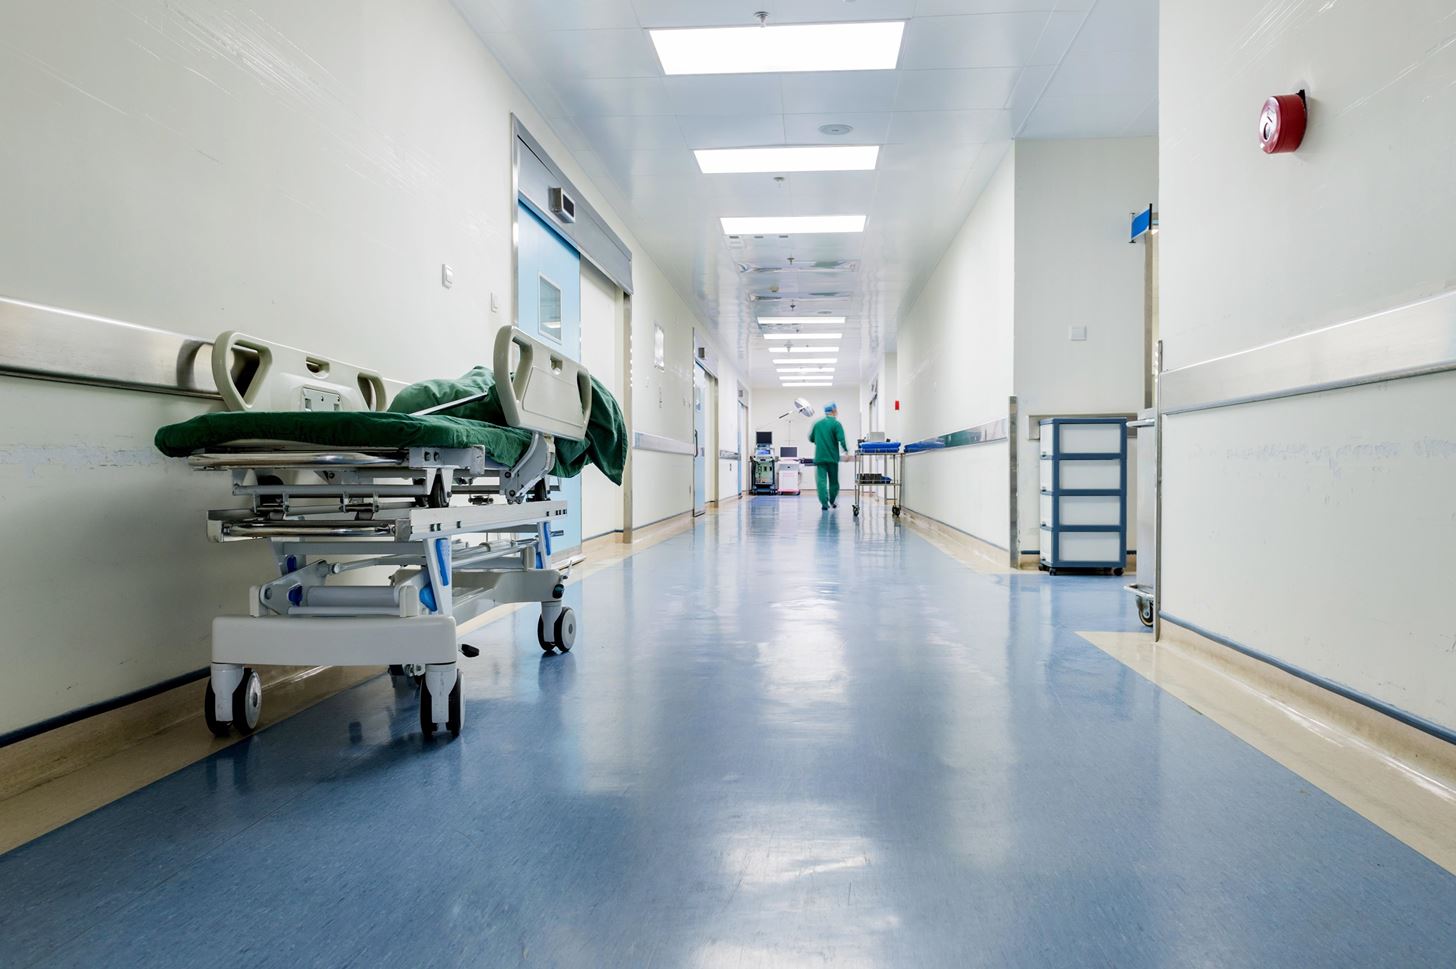 Hospital Floors May Look Clean, but They're Teeming with Deadly Superbugs—Including MRSA, VRE & C. Diff